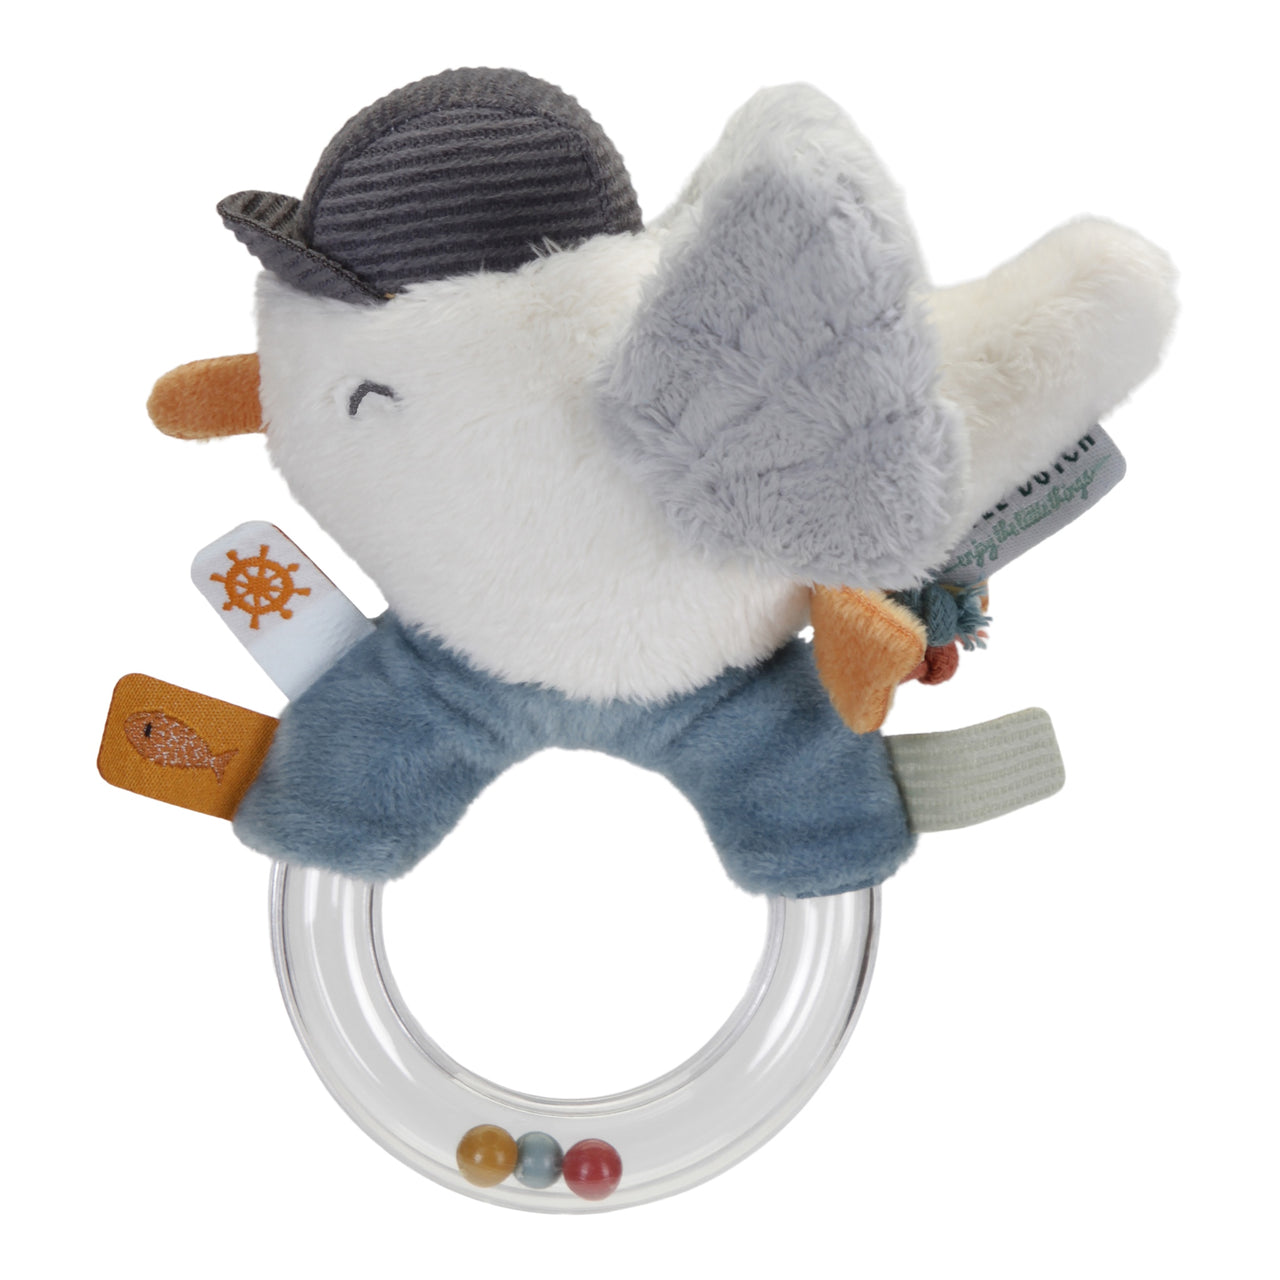 From the coast to the cot. This easy-to-grab rattle ring in the shape of a seagull makes for an attractive first toy. Designed to keep your baby busy, it offers various entertaining details, ranging from illustrated labels to colourful little knots. The wings of the seagull make a crinkling sound and the beads in the ring rattle when your baby plays with this fun toy.